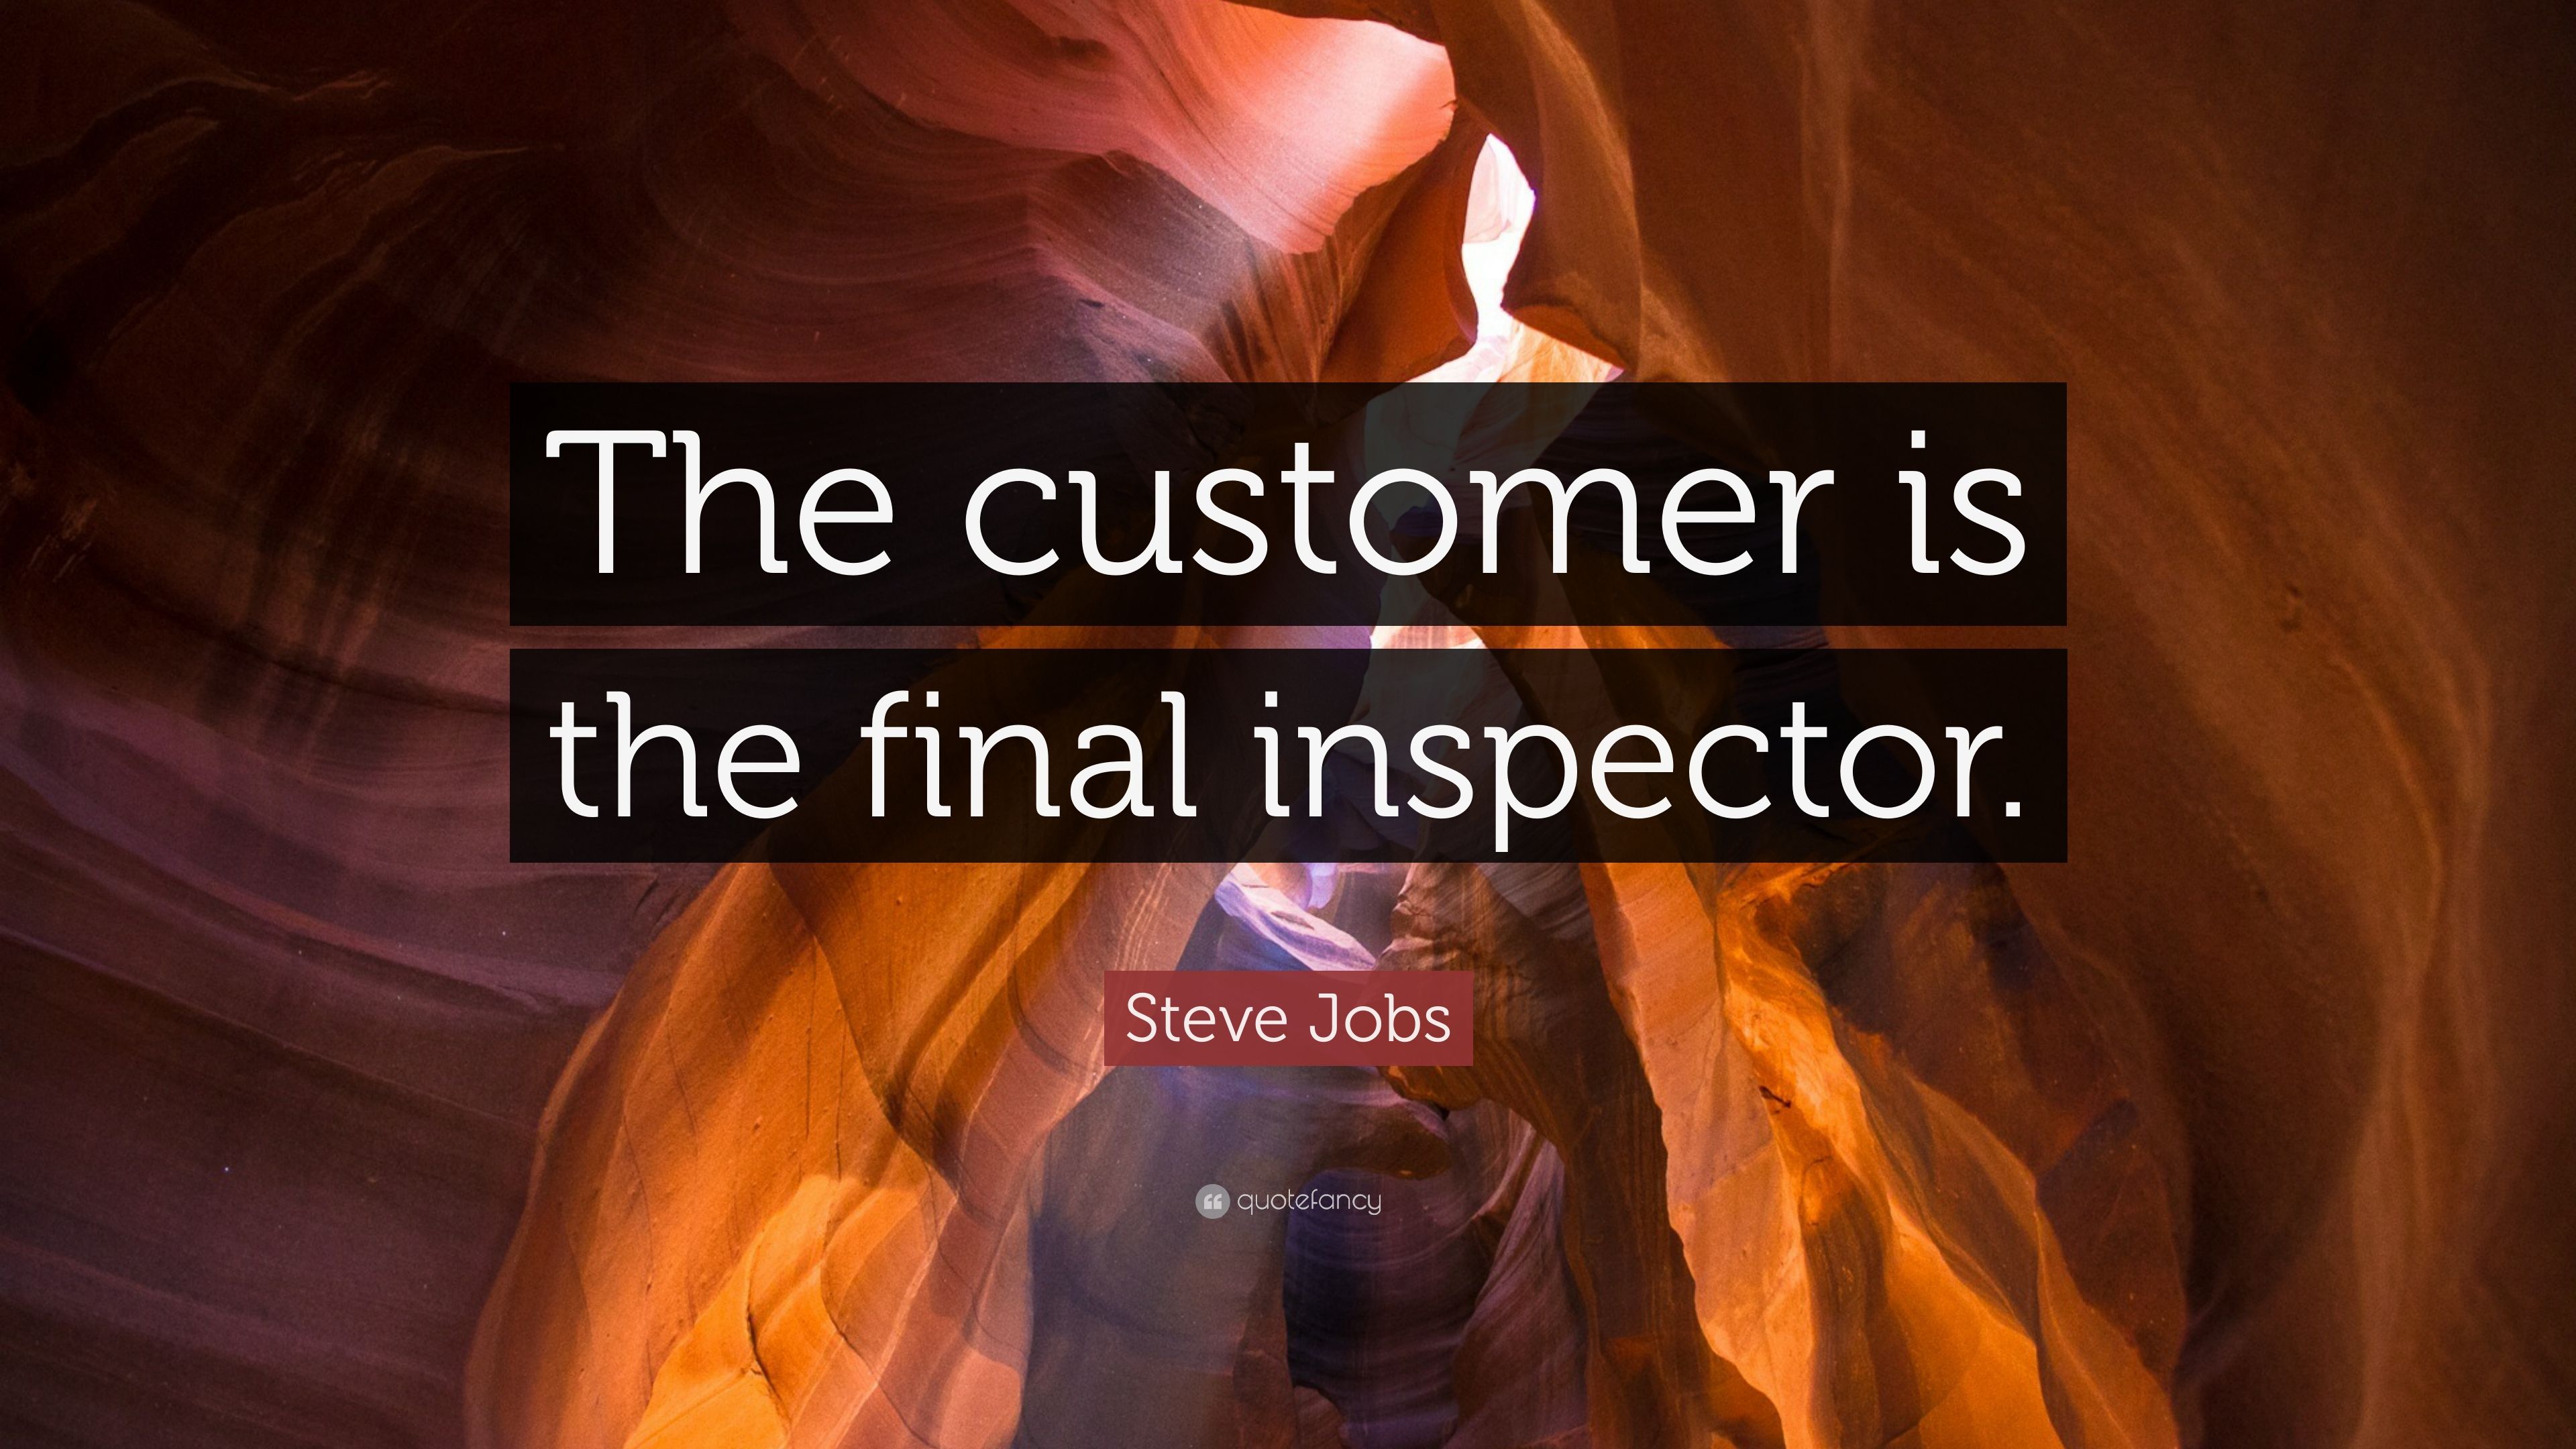 Steve Jobs Quote: “The customer is the final inspector.” 12